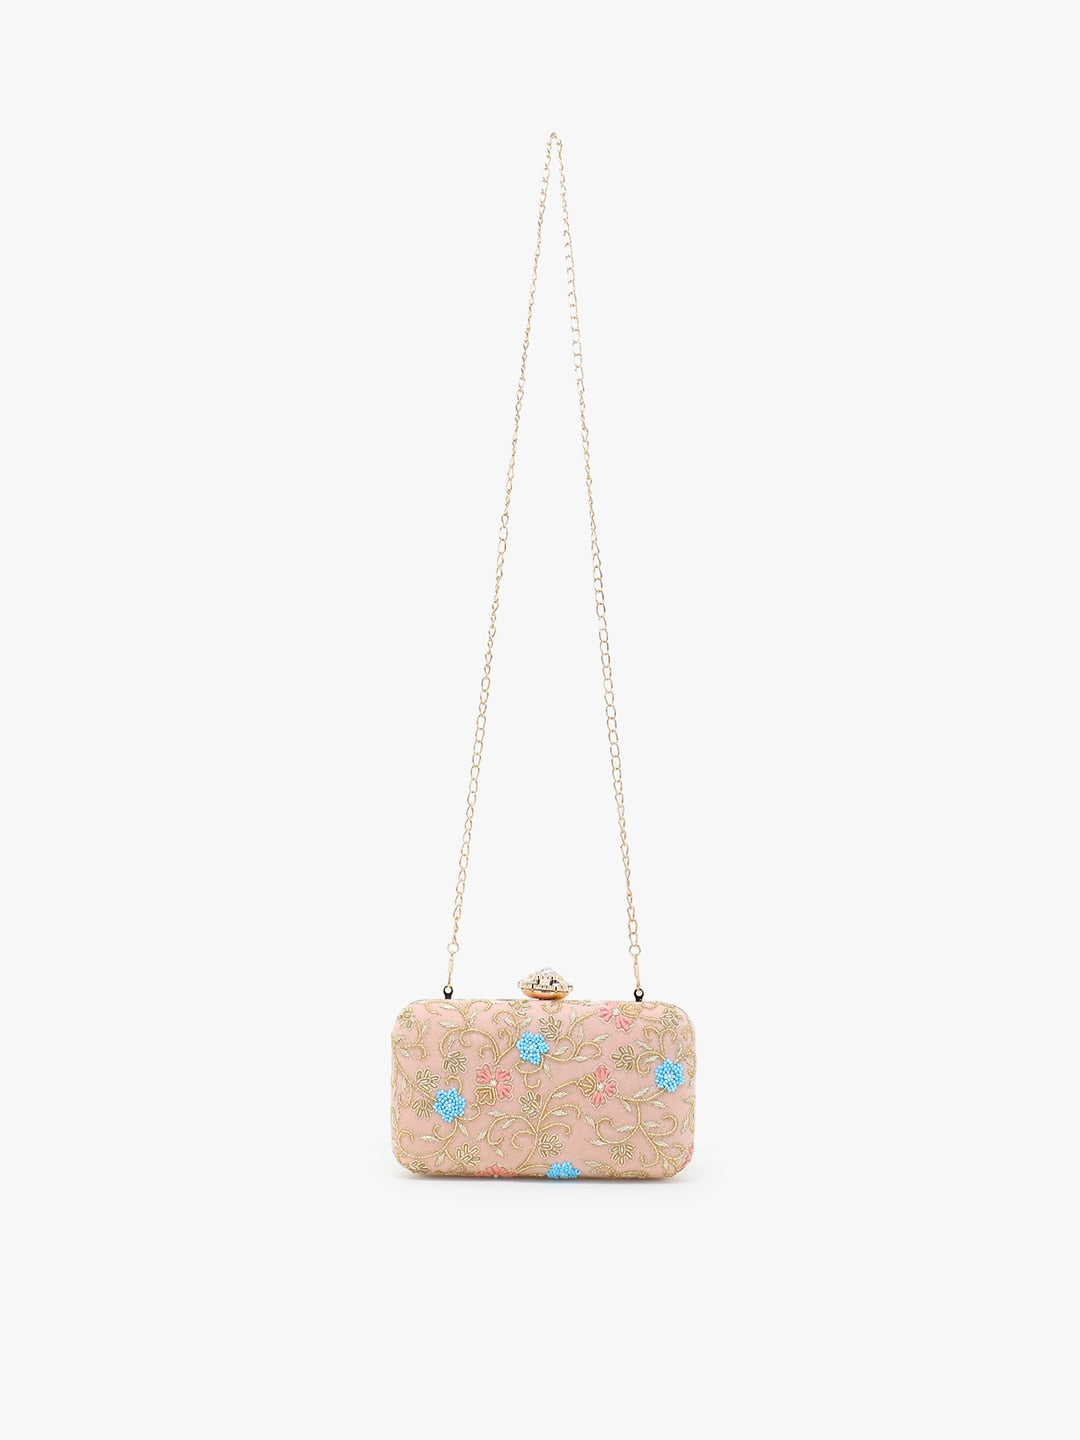 Anekaant Peach-Coloured & Blue Embellished Box Clutch - Distacart